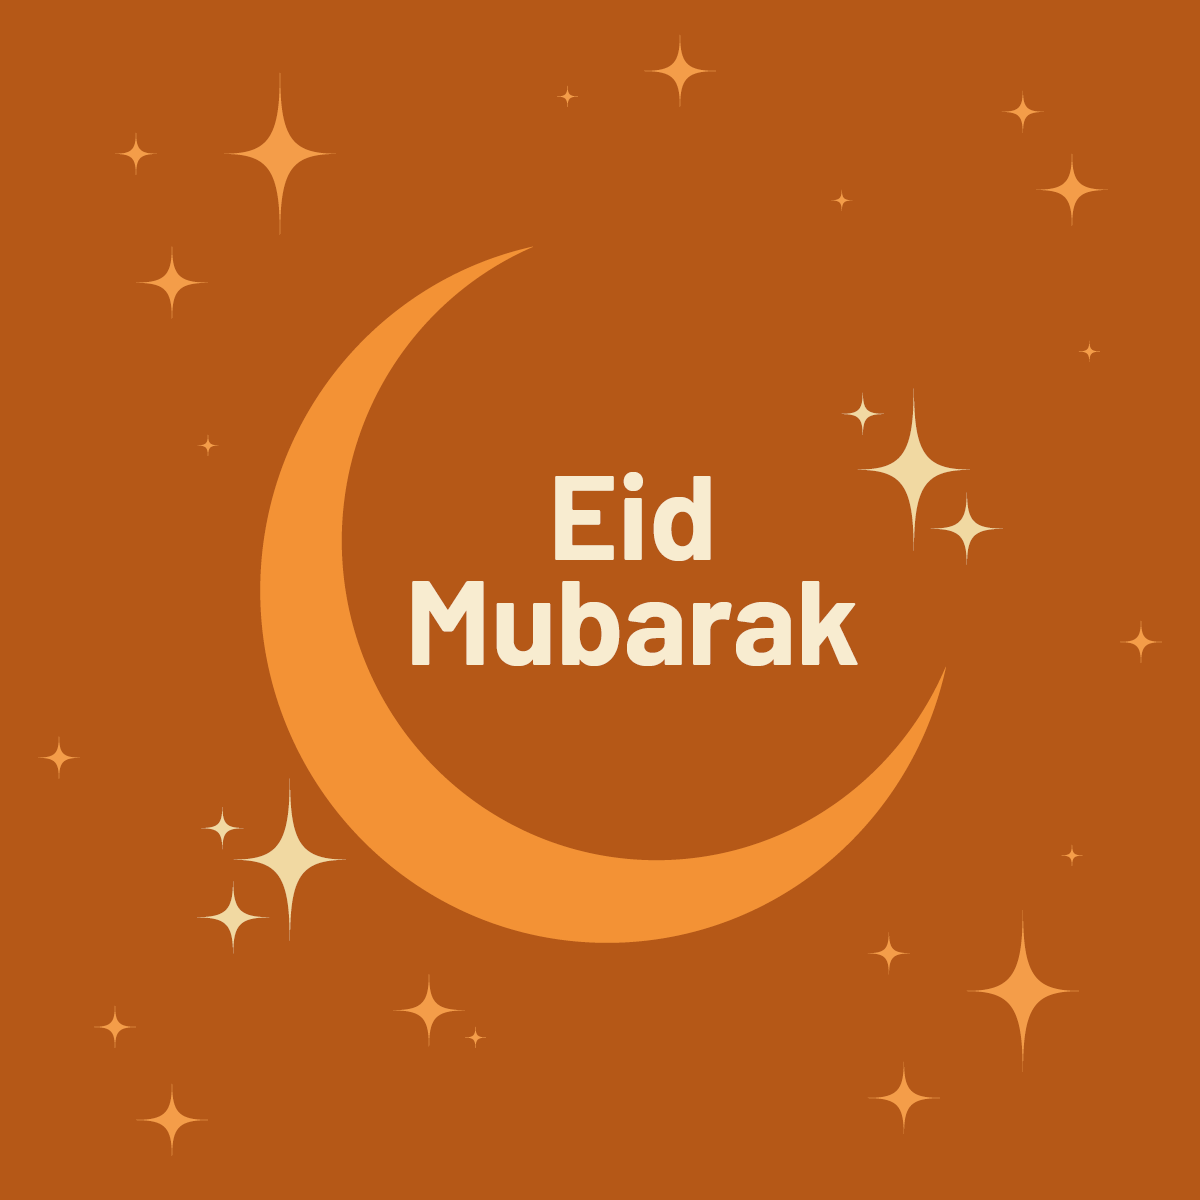 Eid Mubarak to all our staff and students who are celebrating! #shipleycollege #saltaire #eidmubarak